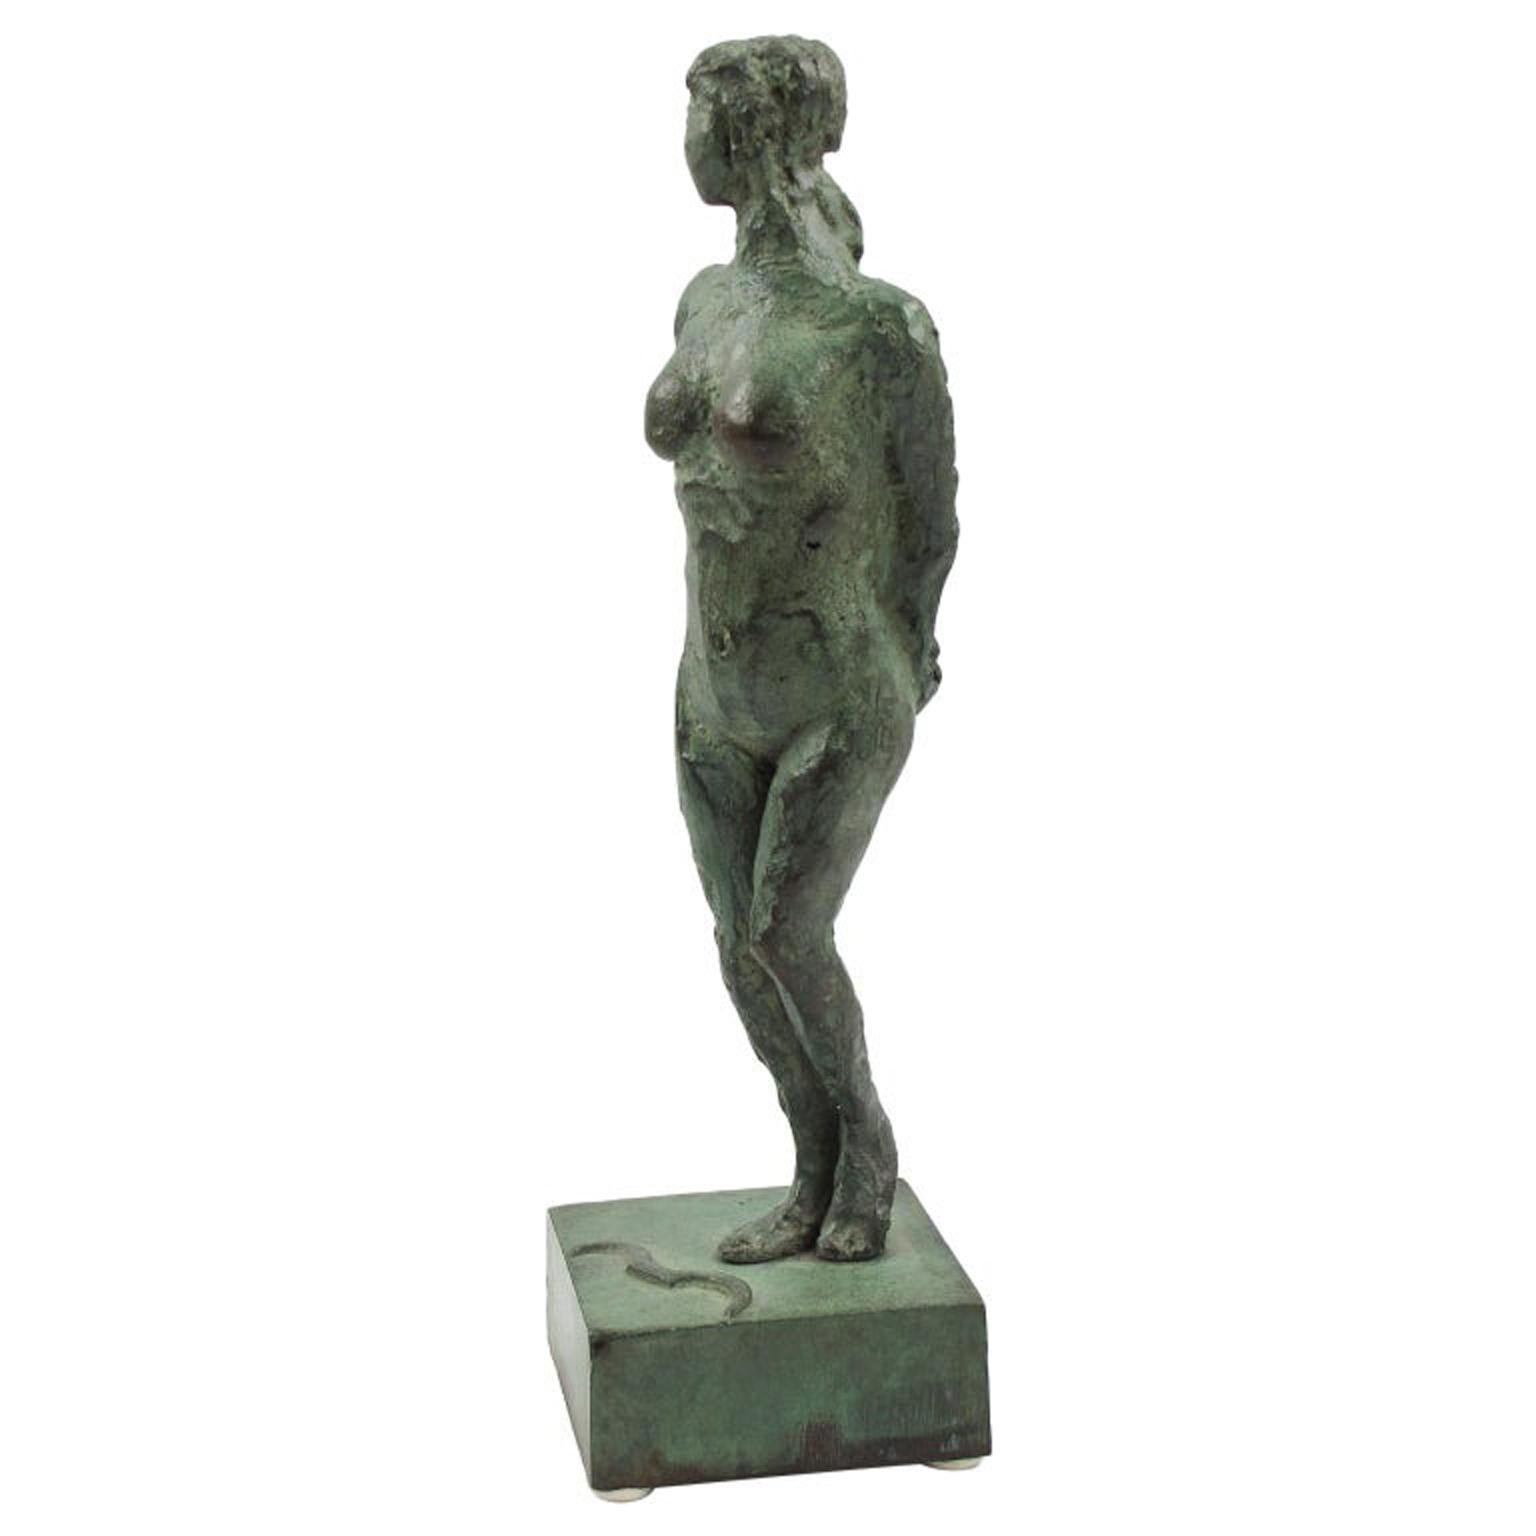 This stunning French Art Deco bronze sculpture figurine features a stylized free interpretation of Artemis or Diana The Huntress (Diane Chasseresse). The nude female statue has a handmade feel textured pattern design with both arms behind her back